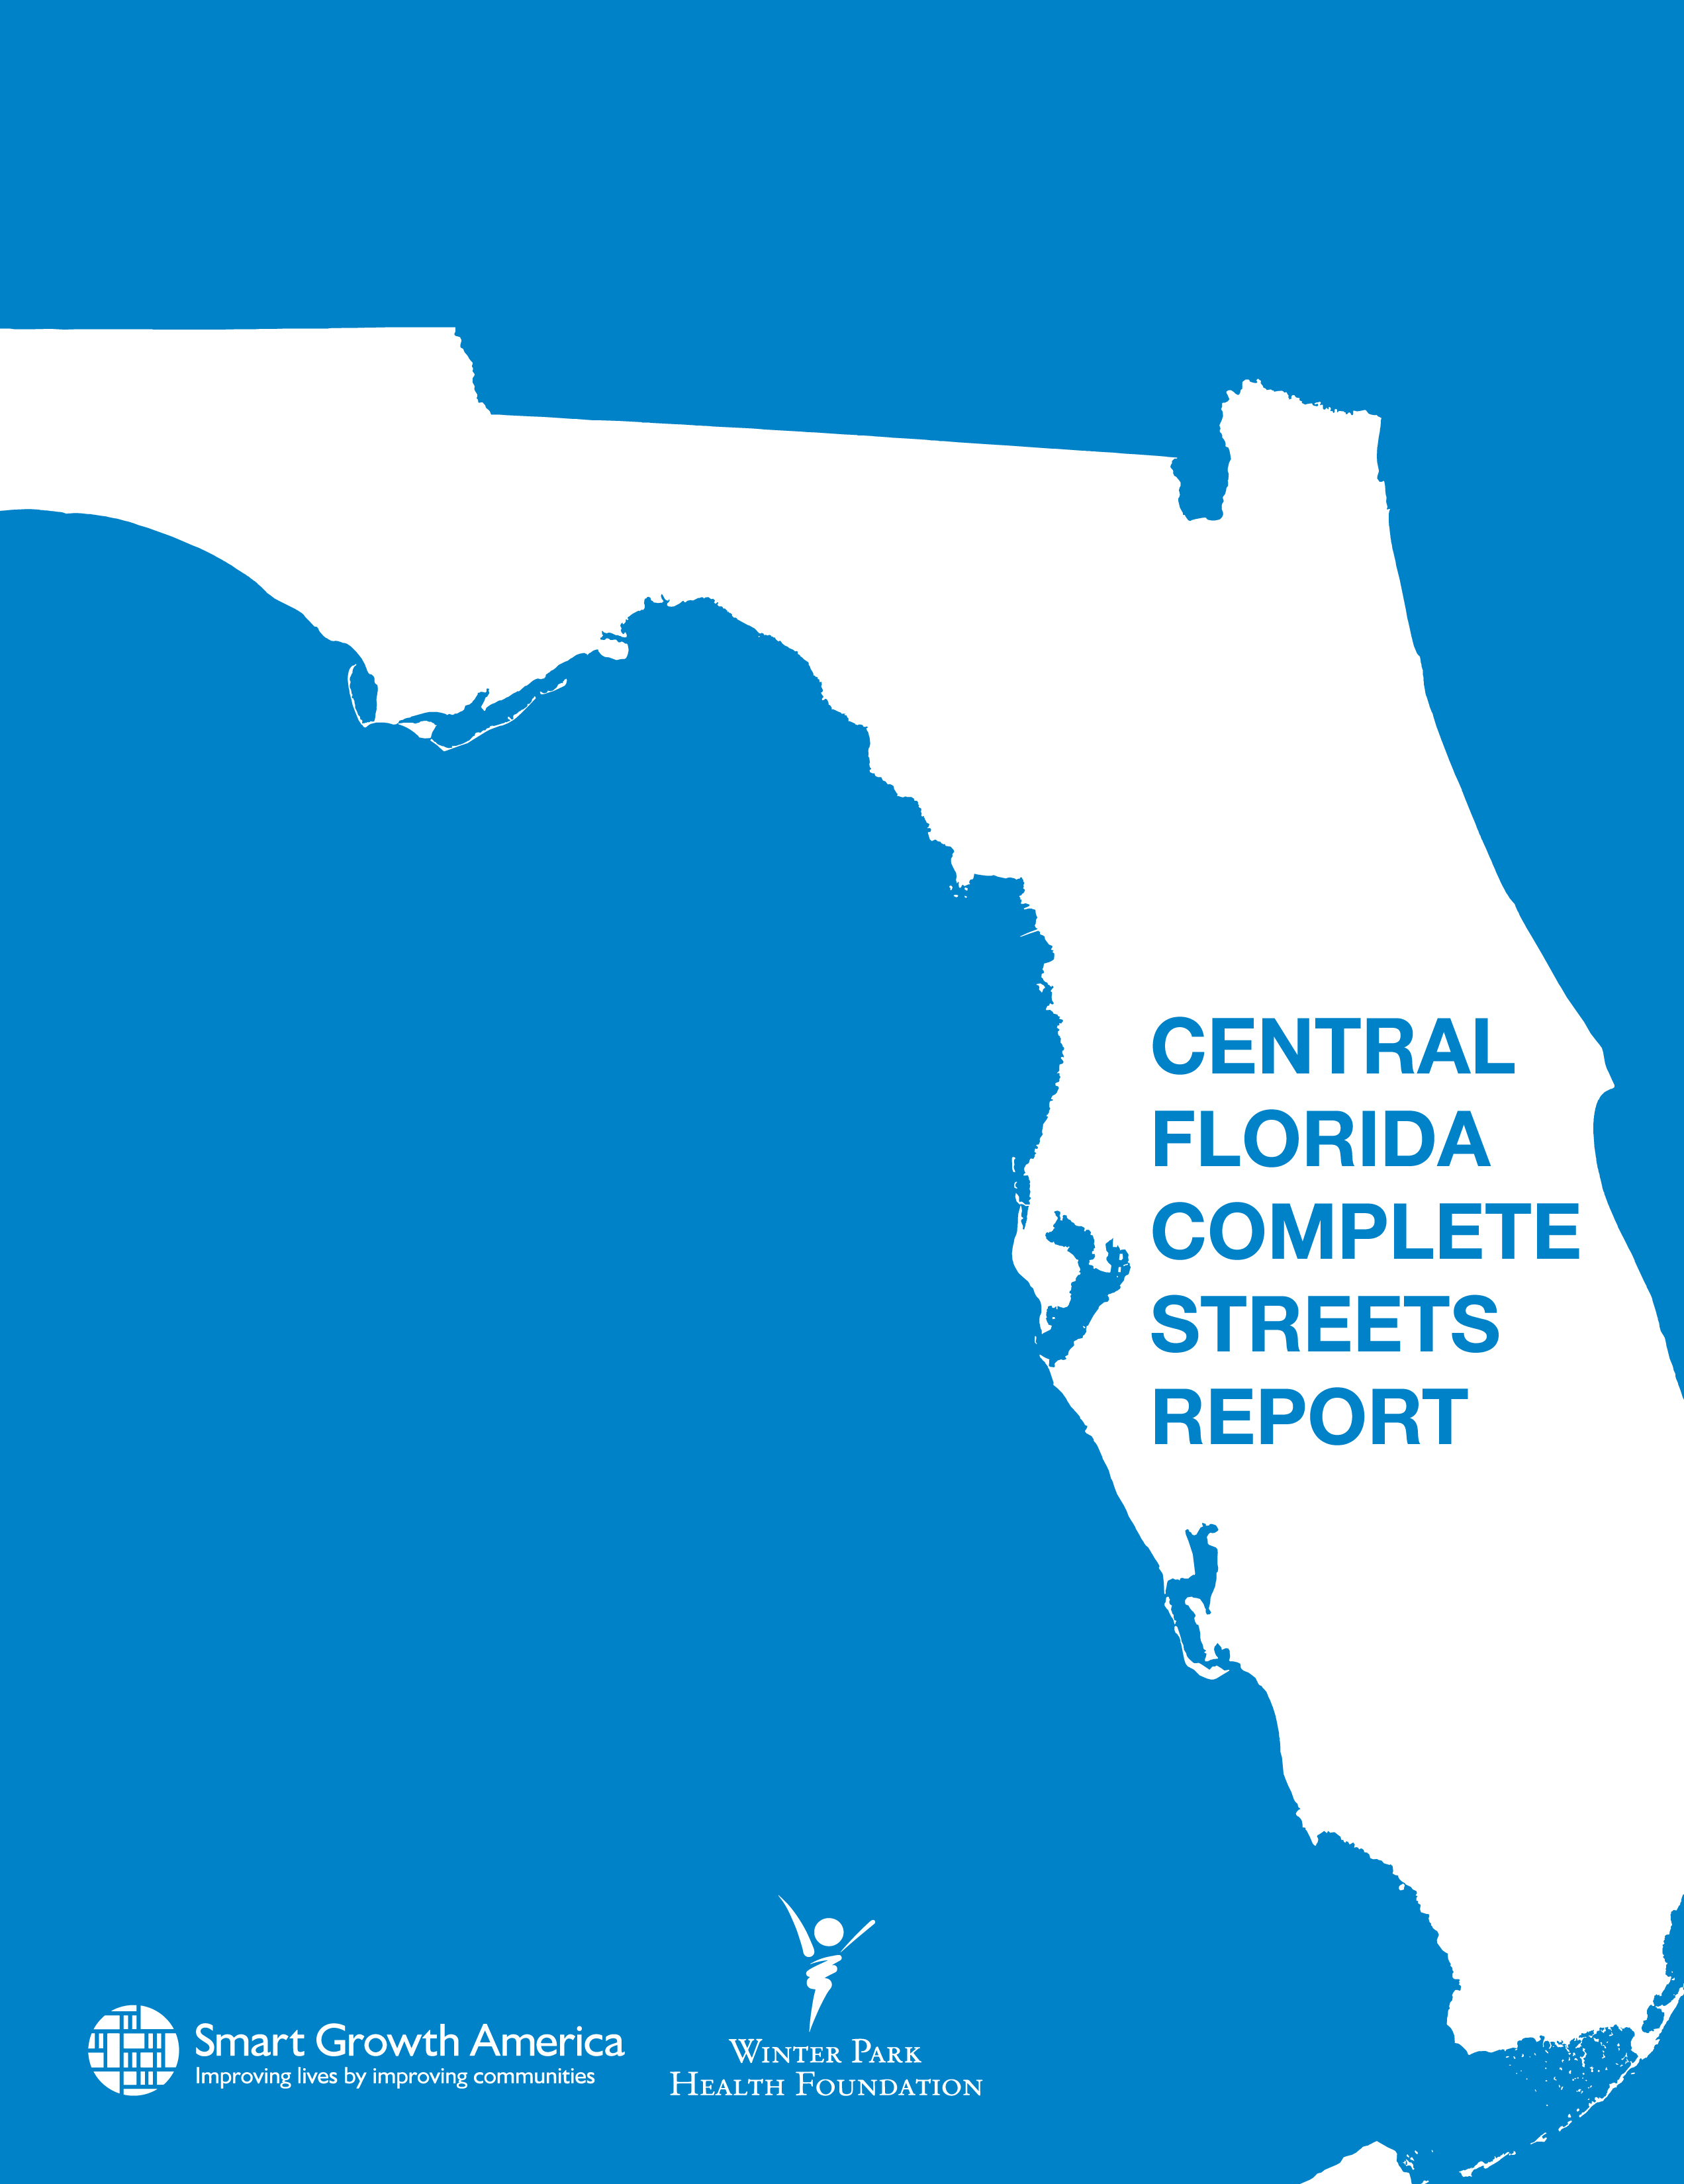 Complete Streets in Central Florida